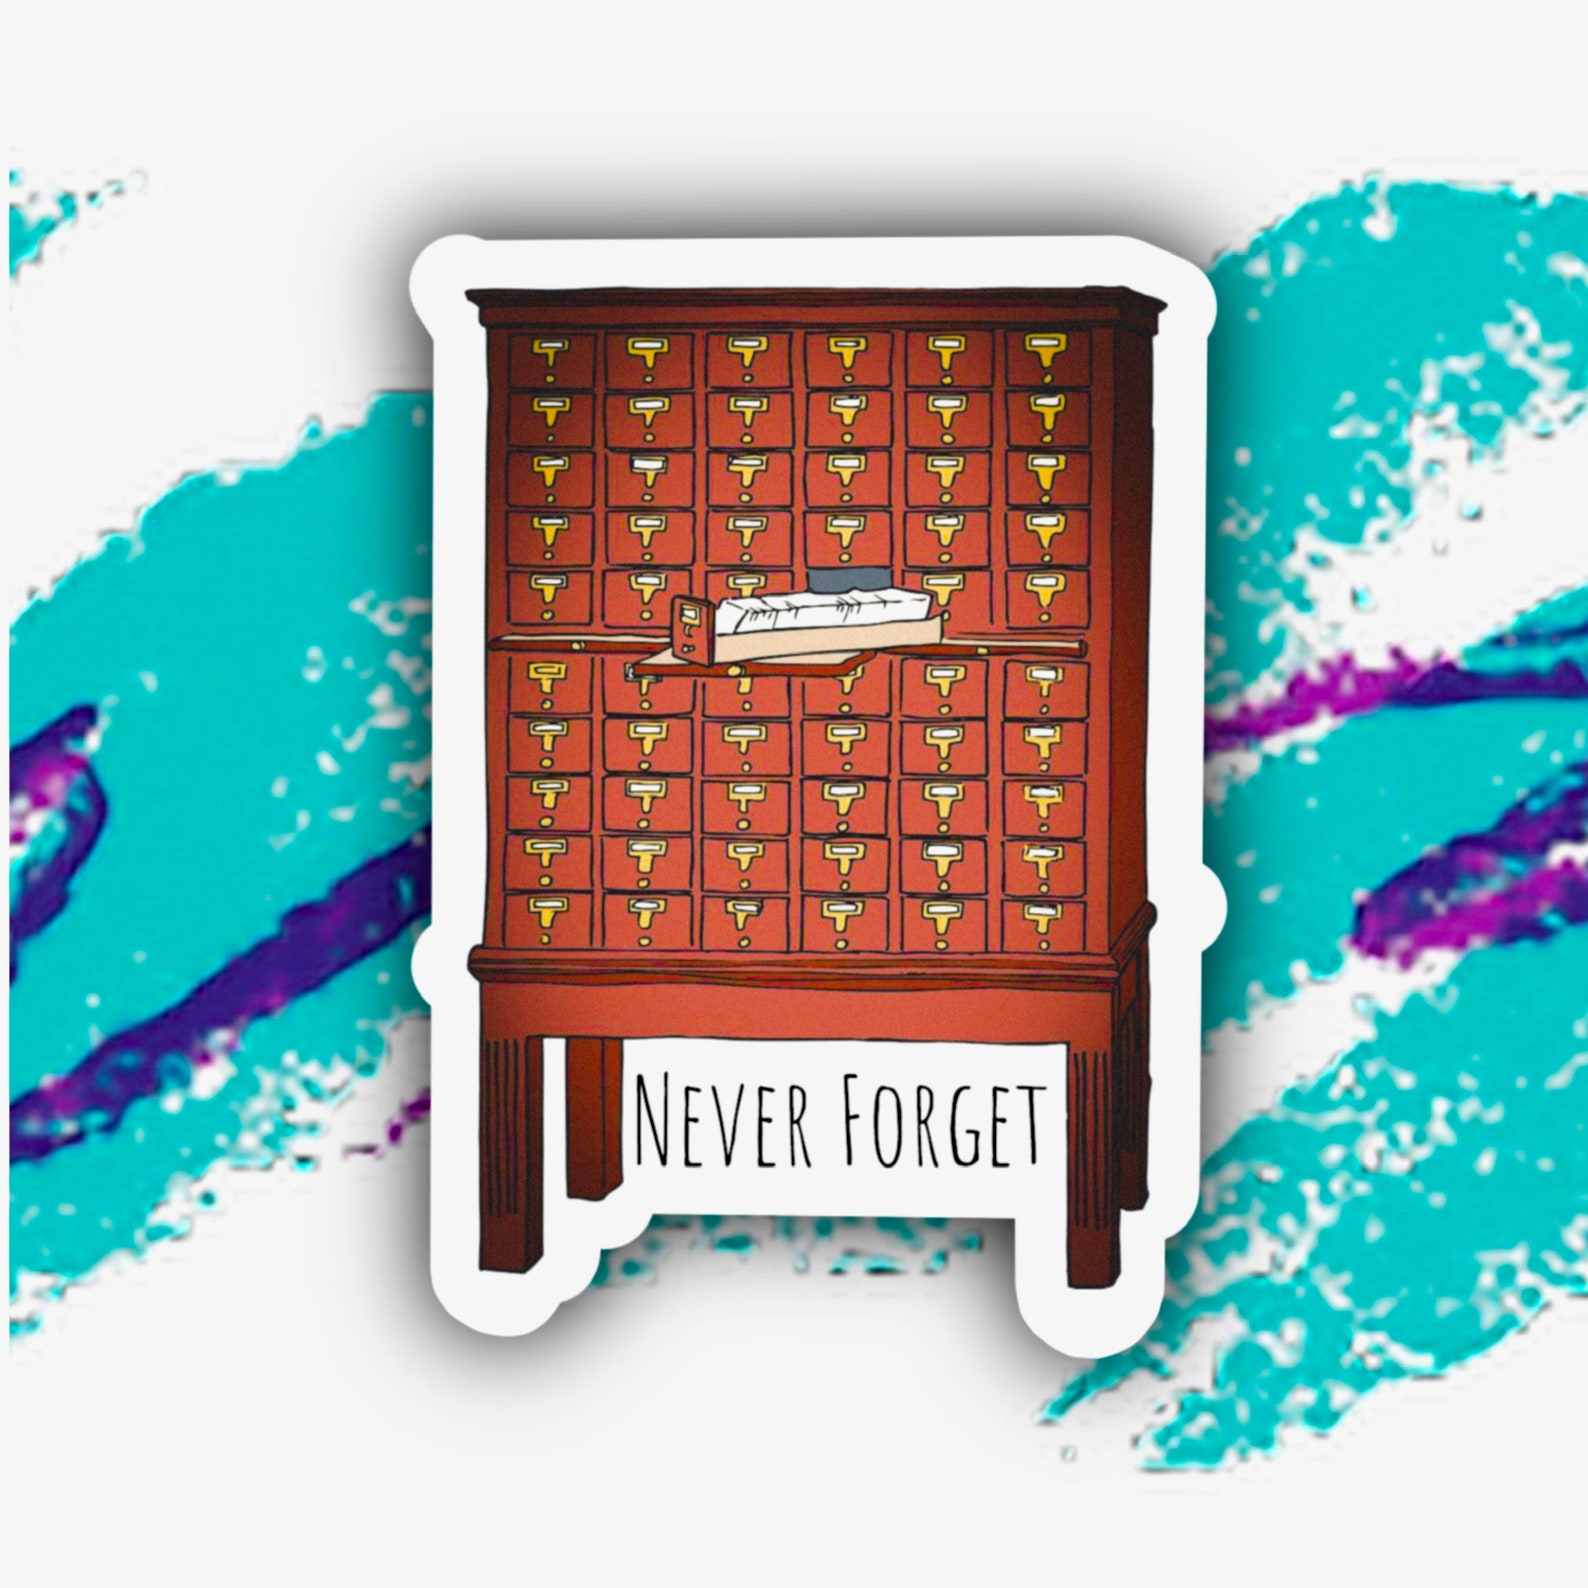 Image of a tall brown library card catalog with the words "never forget" beneath. 